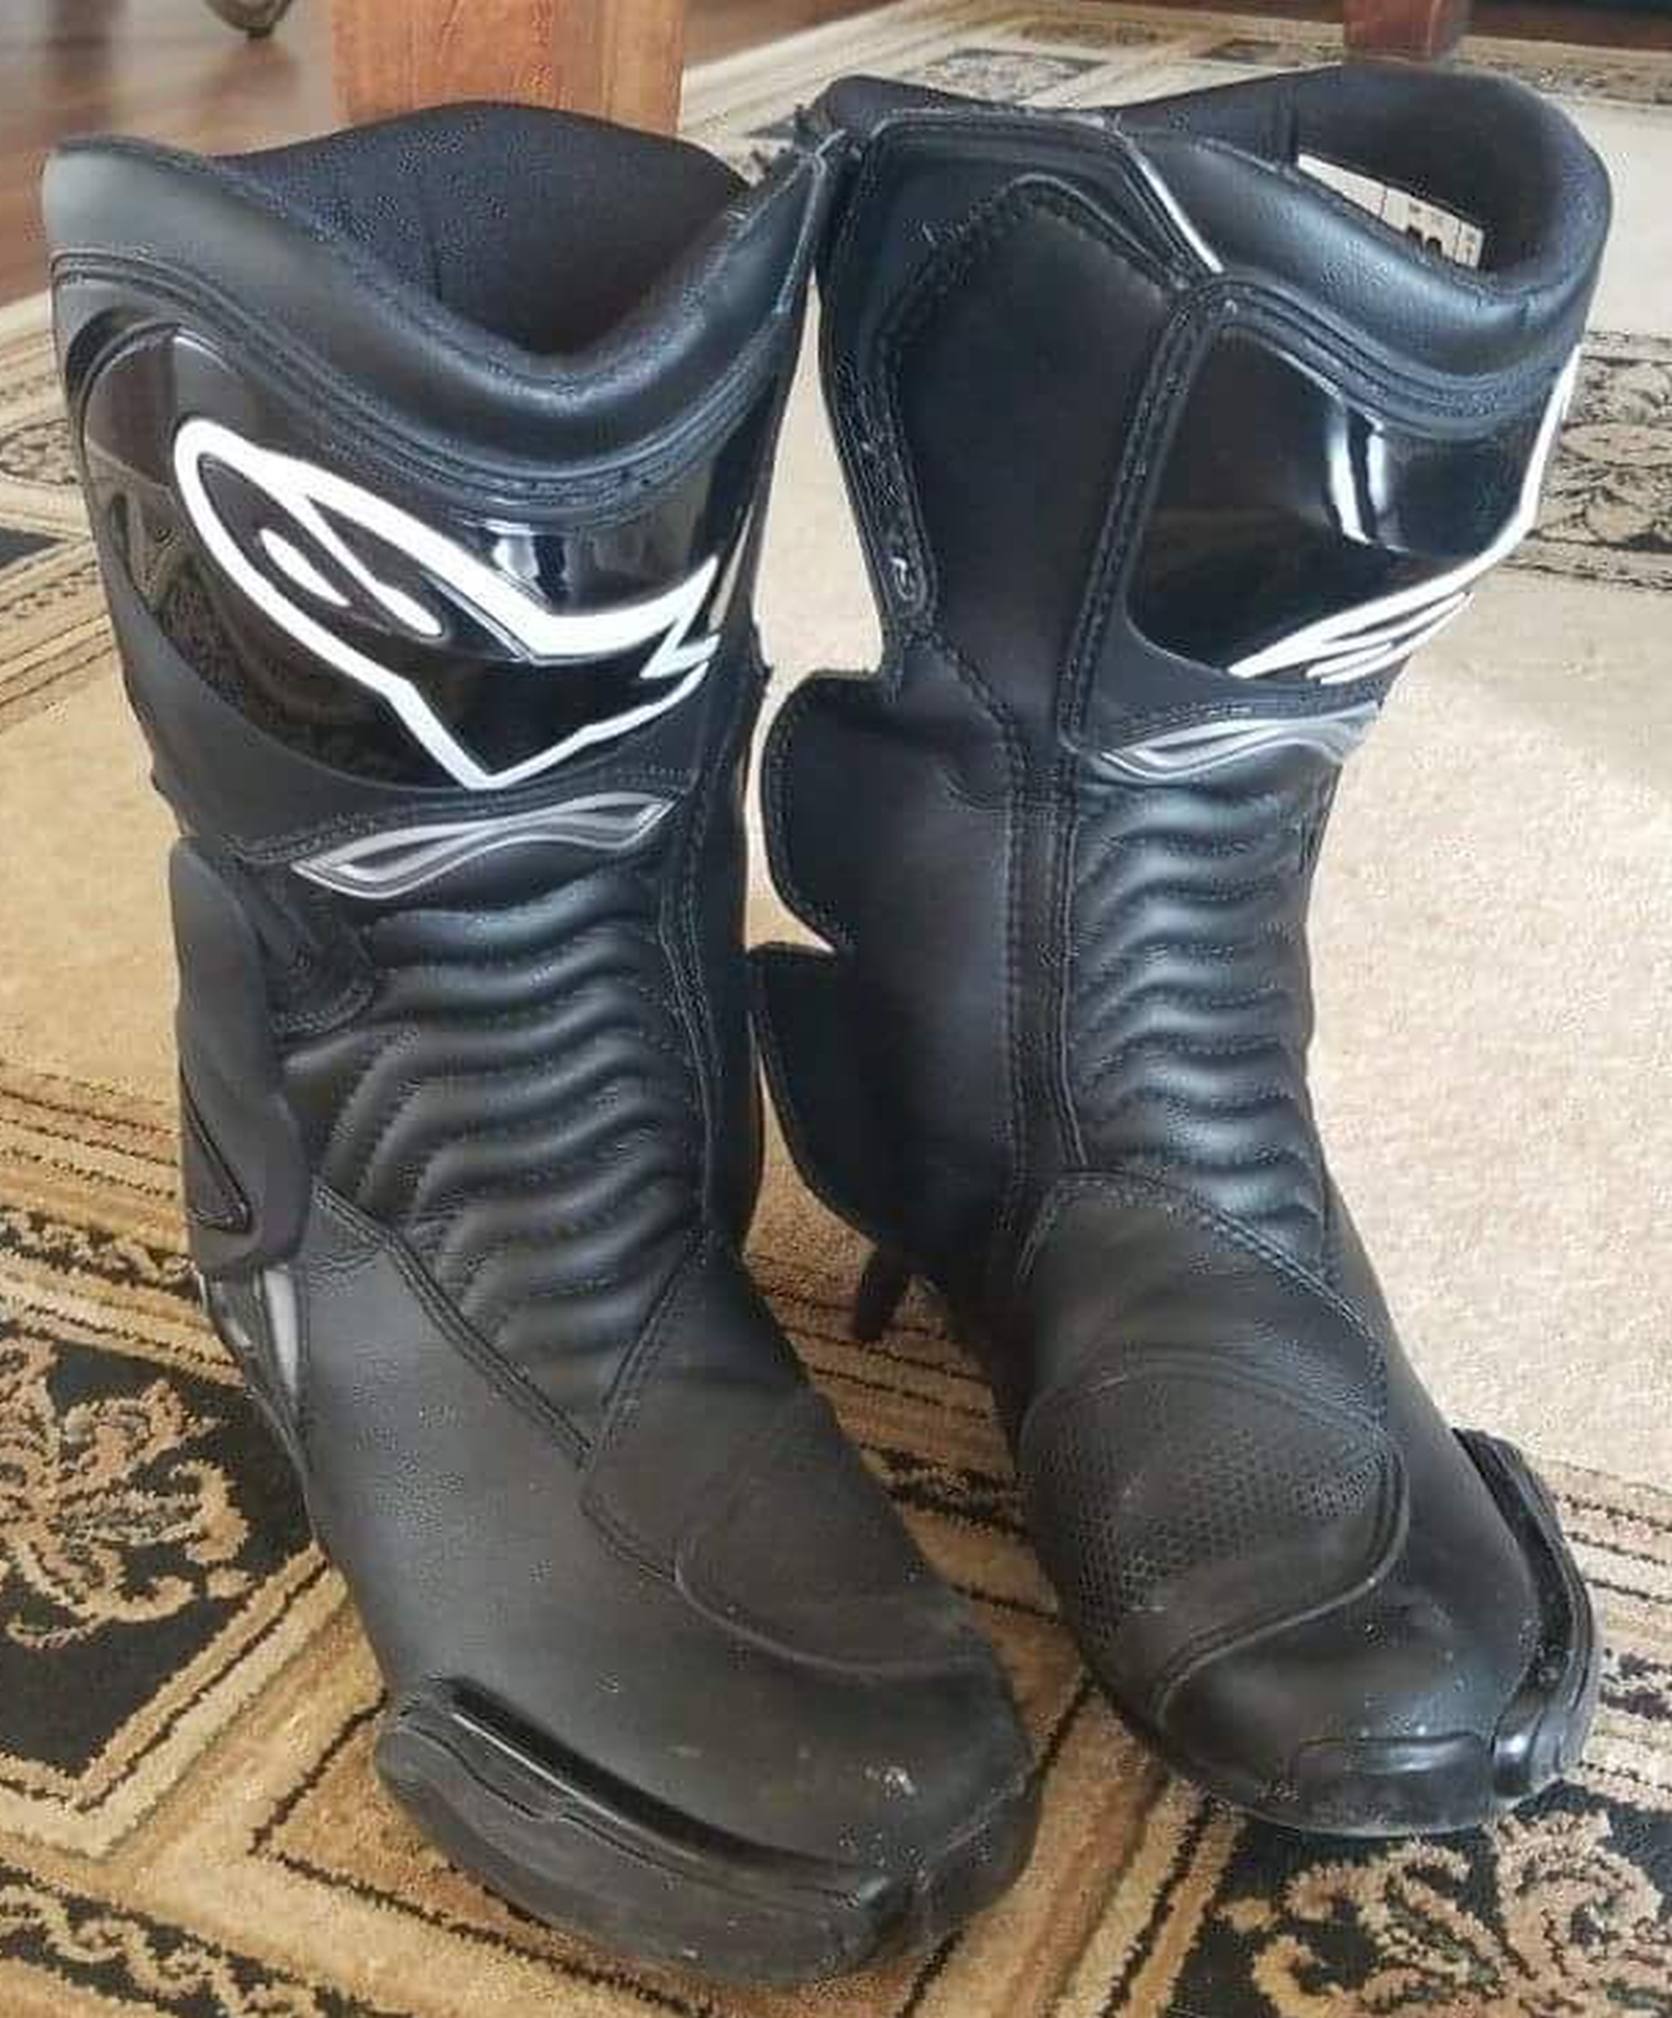 Rugged, stylized sport/MX mens boots, Alpinestars brand. Thick "drag pads" on the outside of the toes show wear.